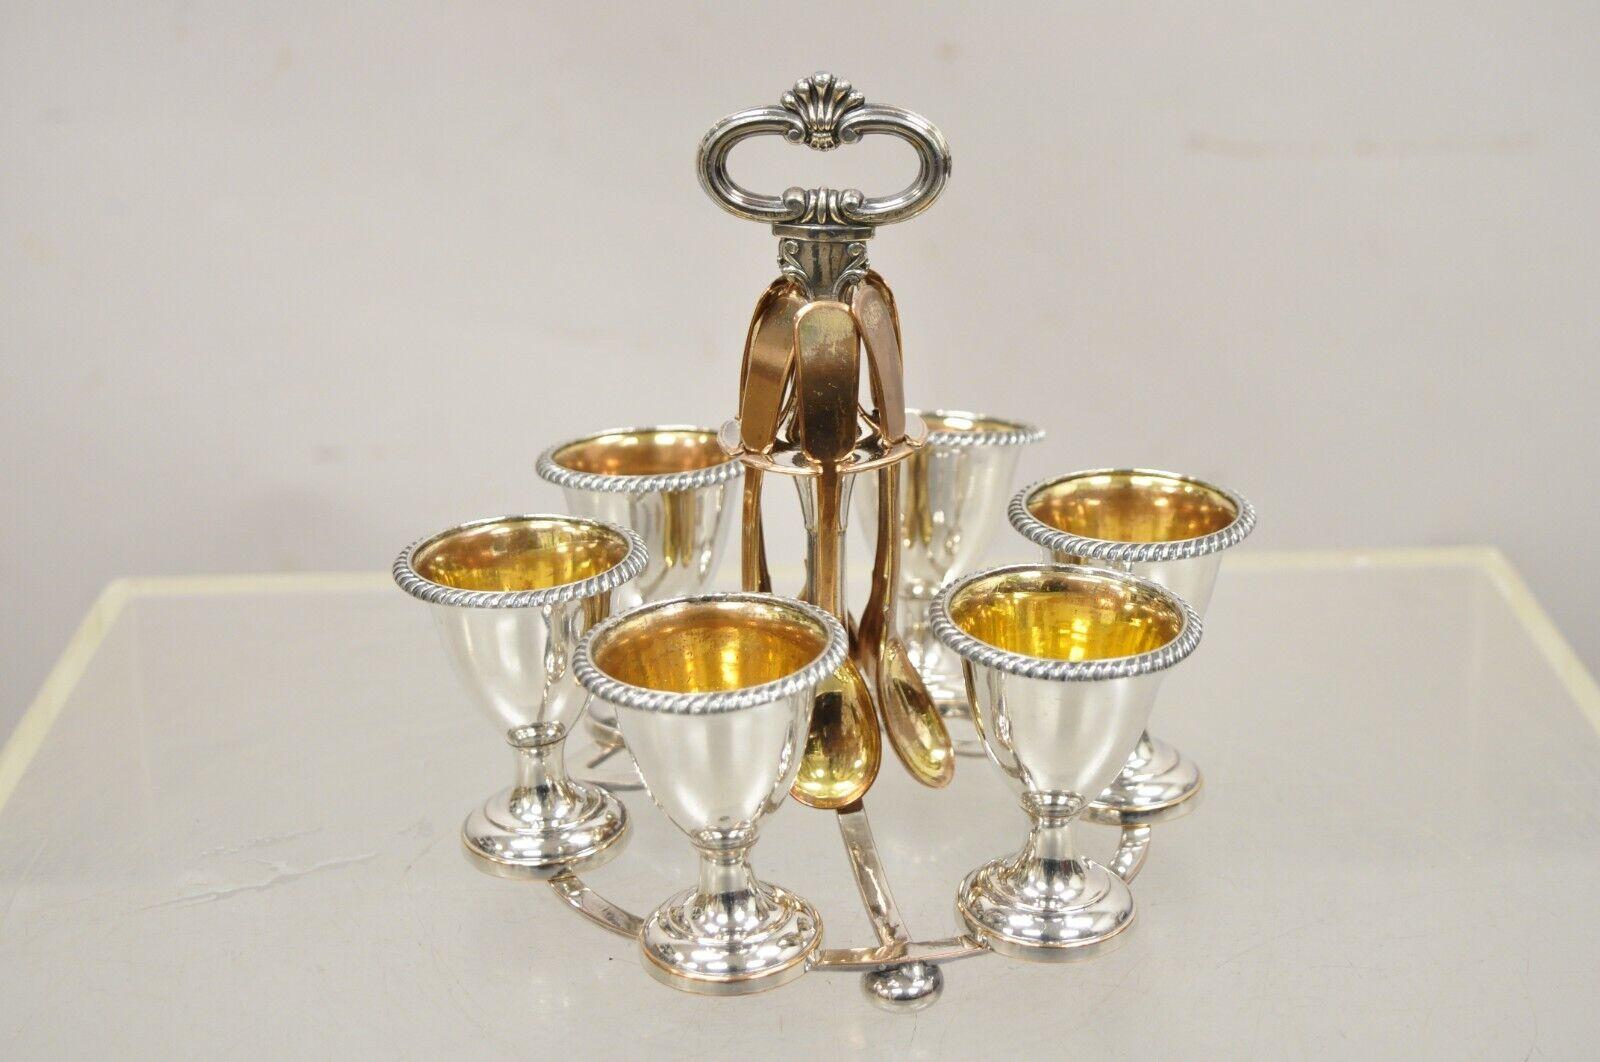 Antique Victorian Silver Plated Egg Server with Spoon Set - Serving for 6. Item featured is an elegant antique silver plate and gold wash egg server for 6. Circa Early 1900s. Measurements: 7